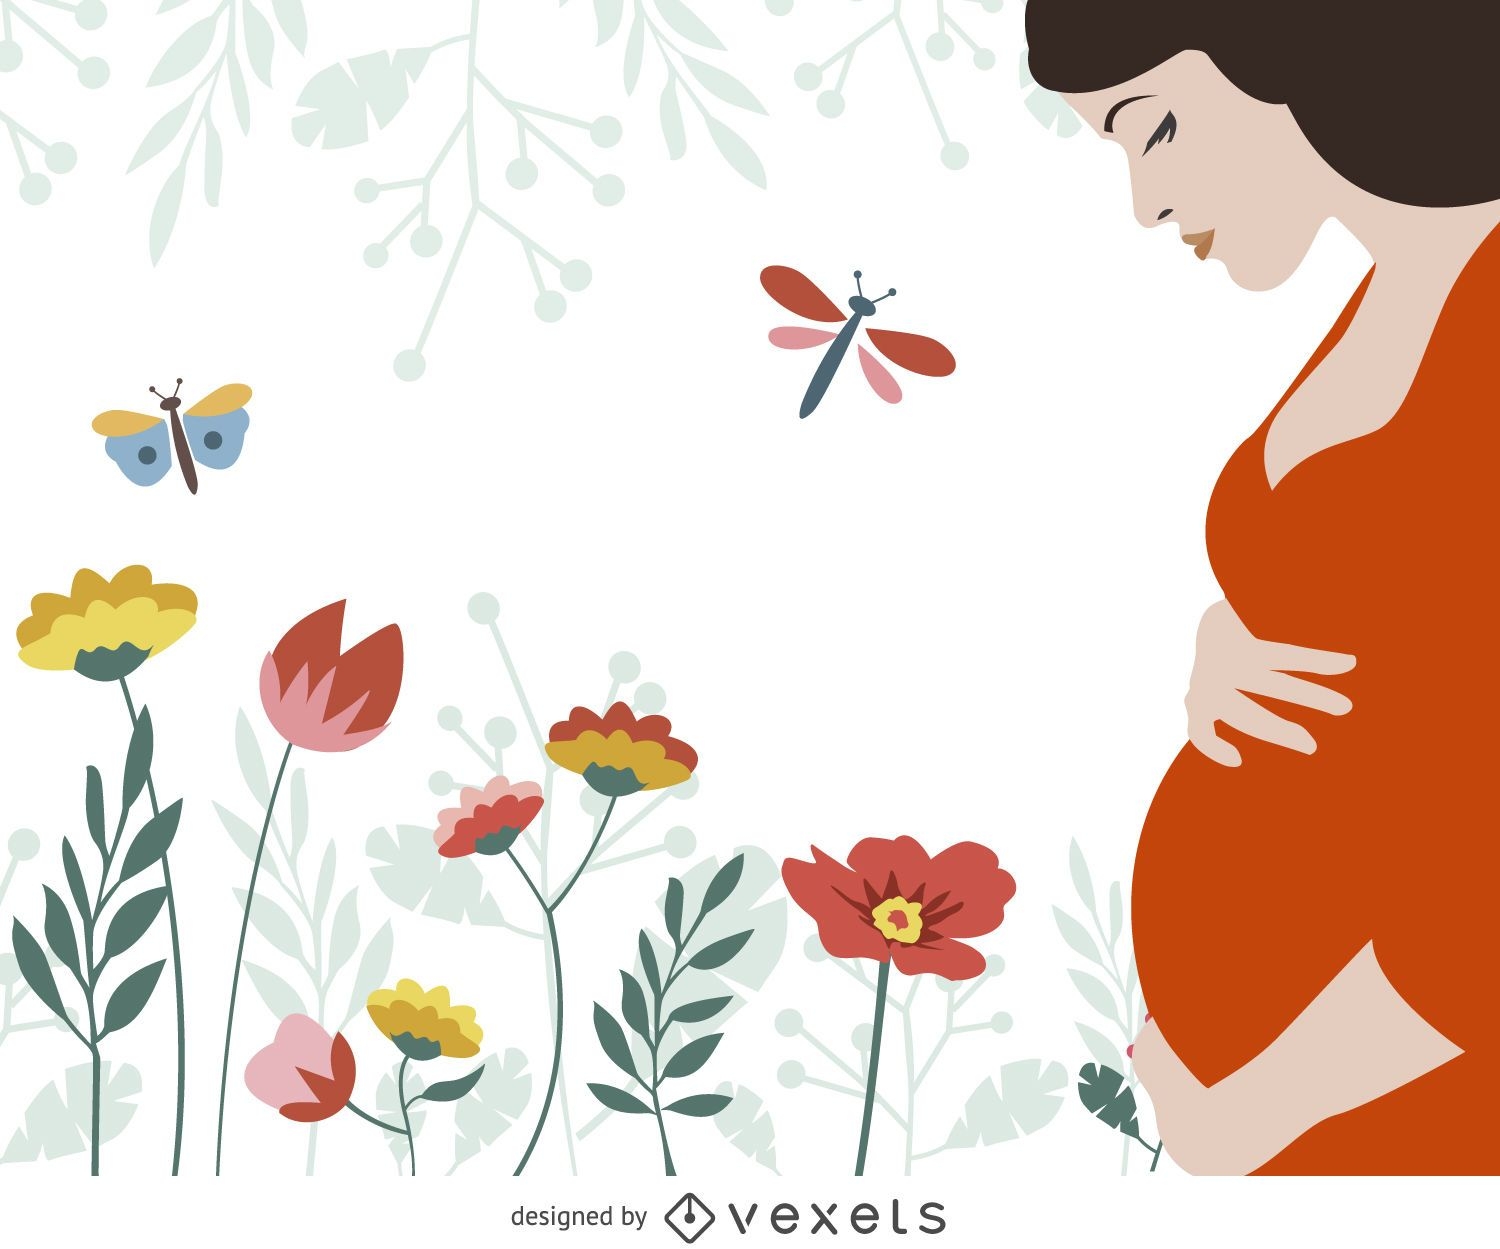 Pregnant woman illustration with flowers